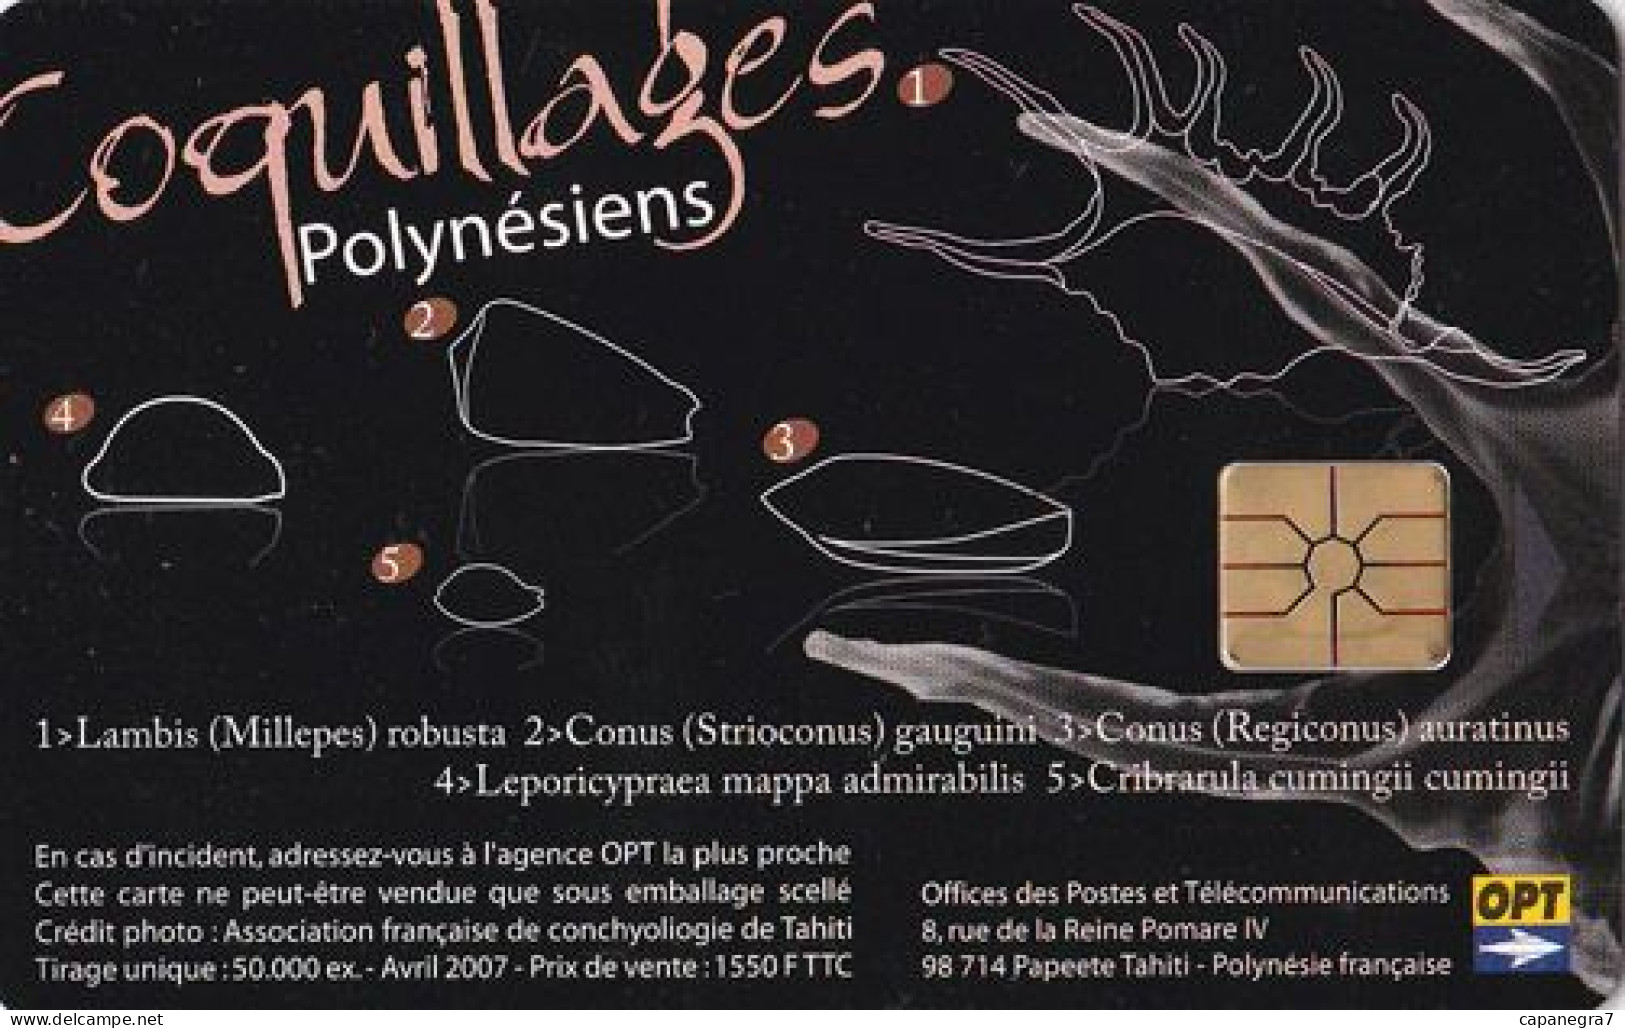 Coquillages Polynésiens, FP159,  French Polynesia - Polynésie Française